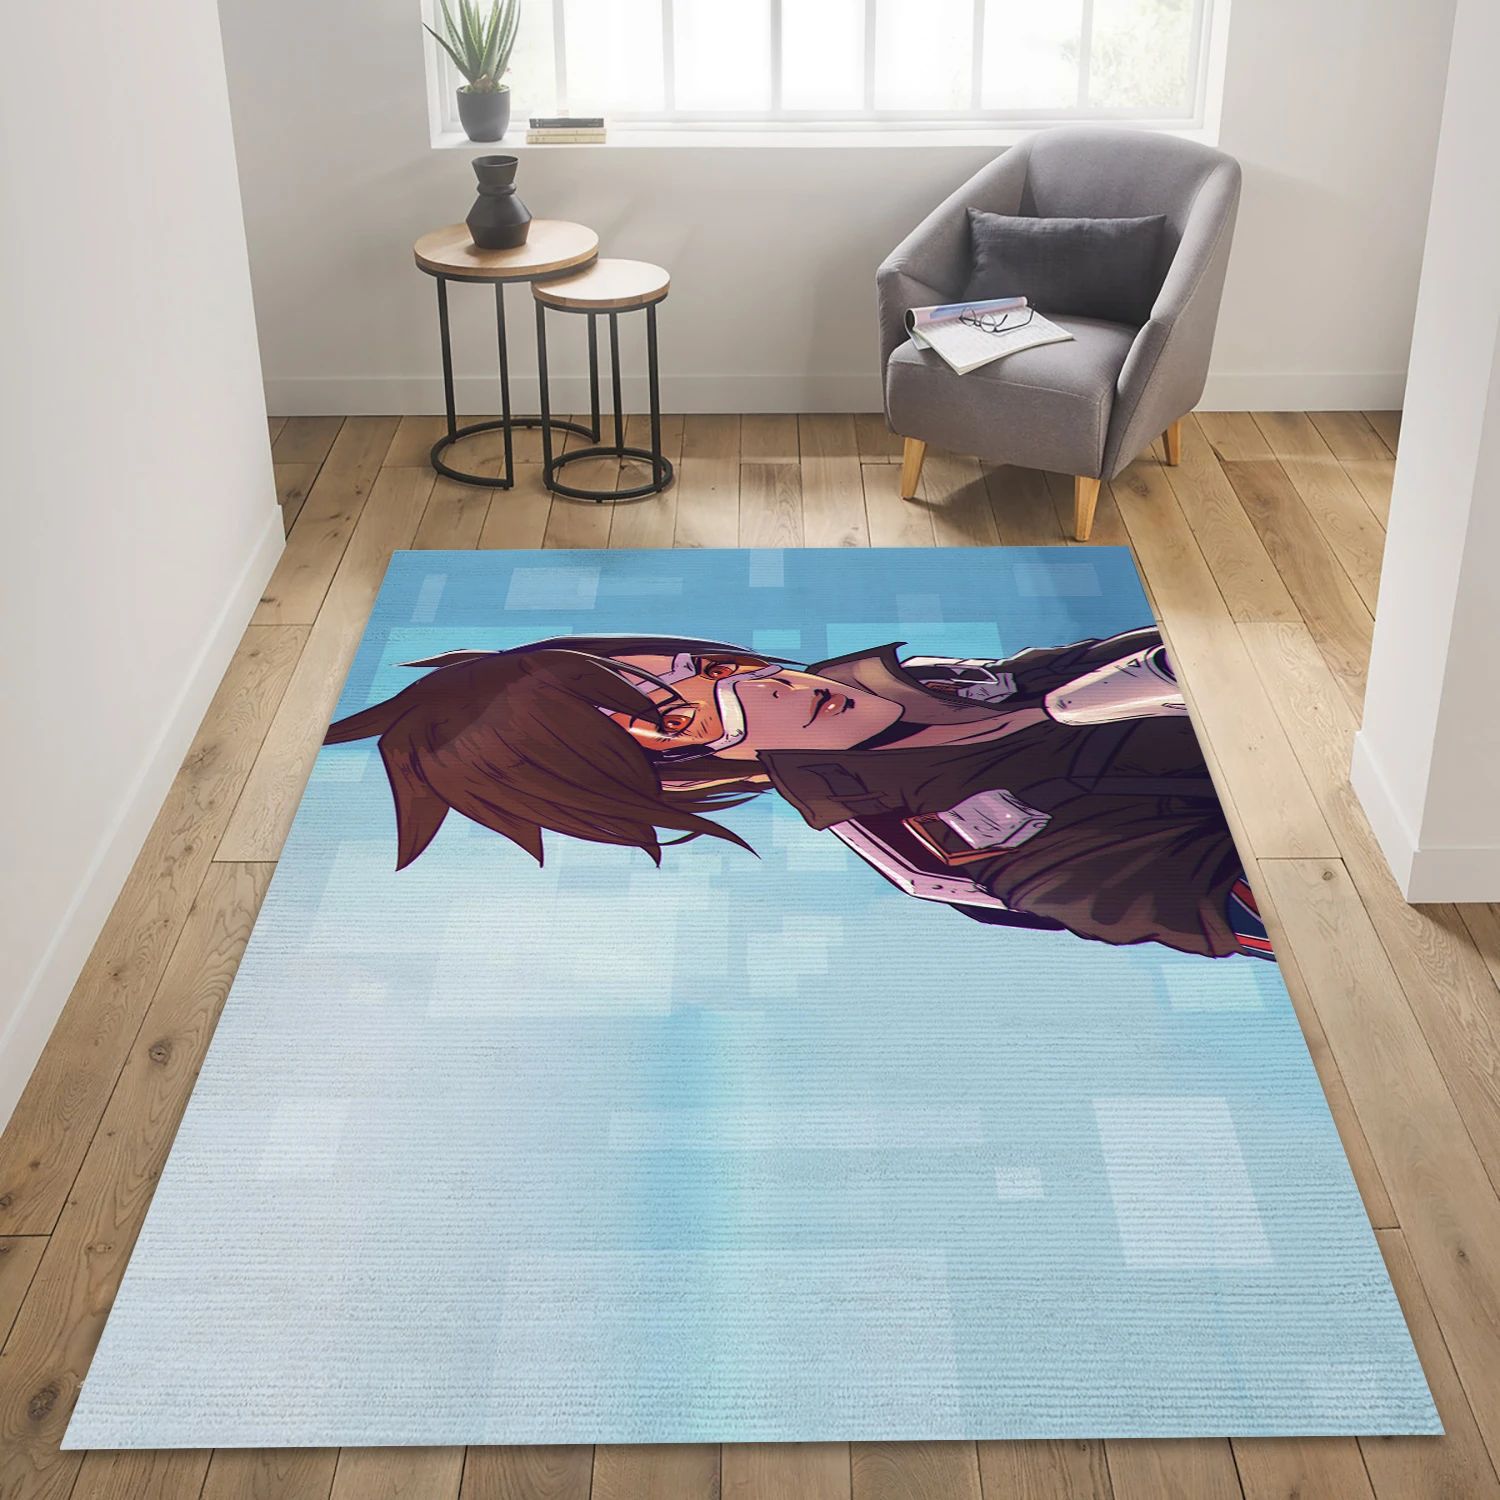 Tracer Overwatch Video Game Reangle Rug, Living Room Rug - Home Decor Floor Decor - Indoor Outdoor Rugs 1